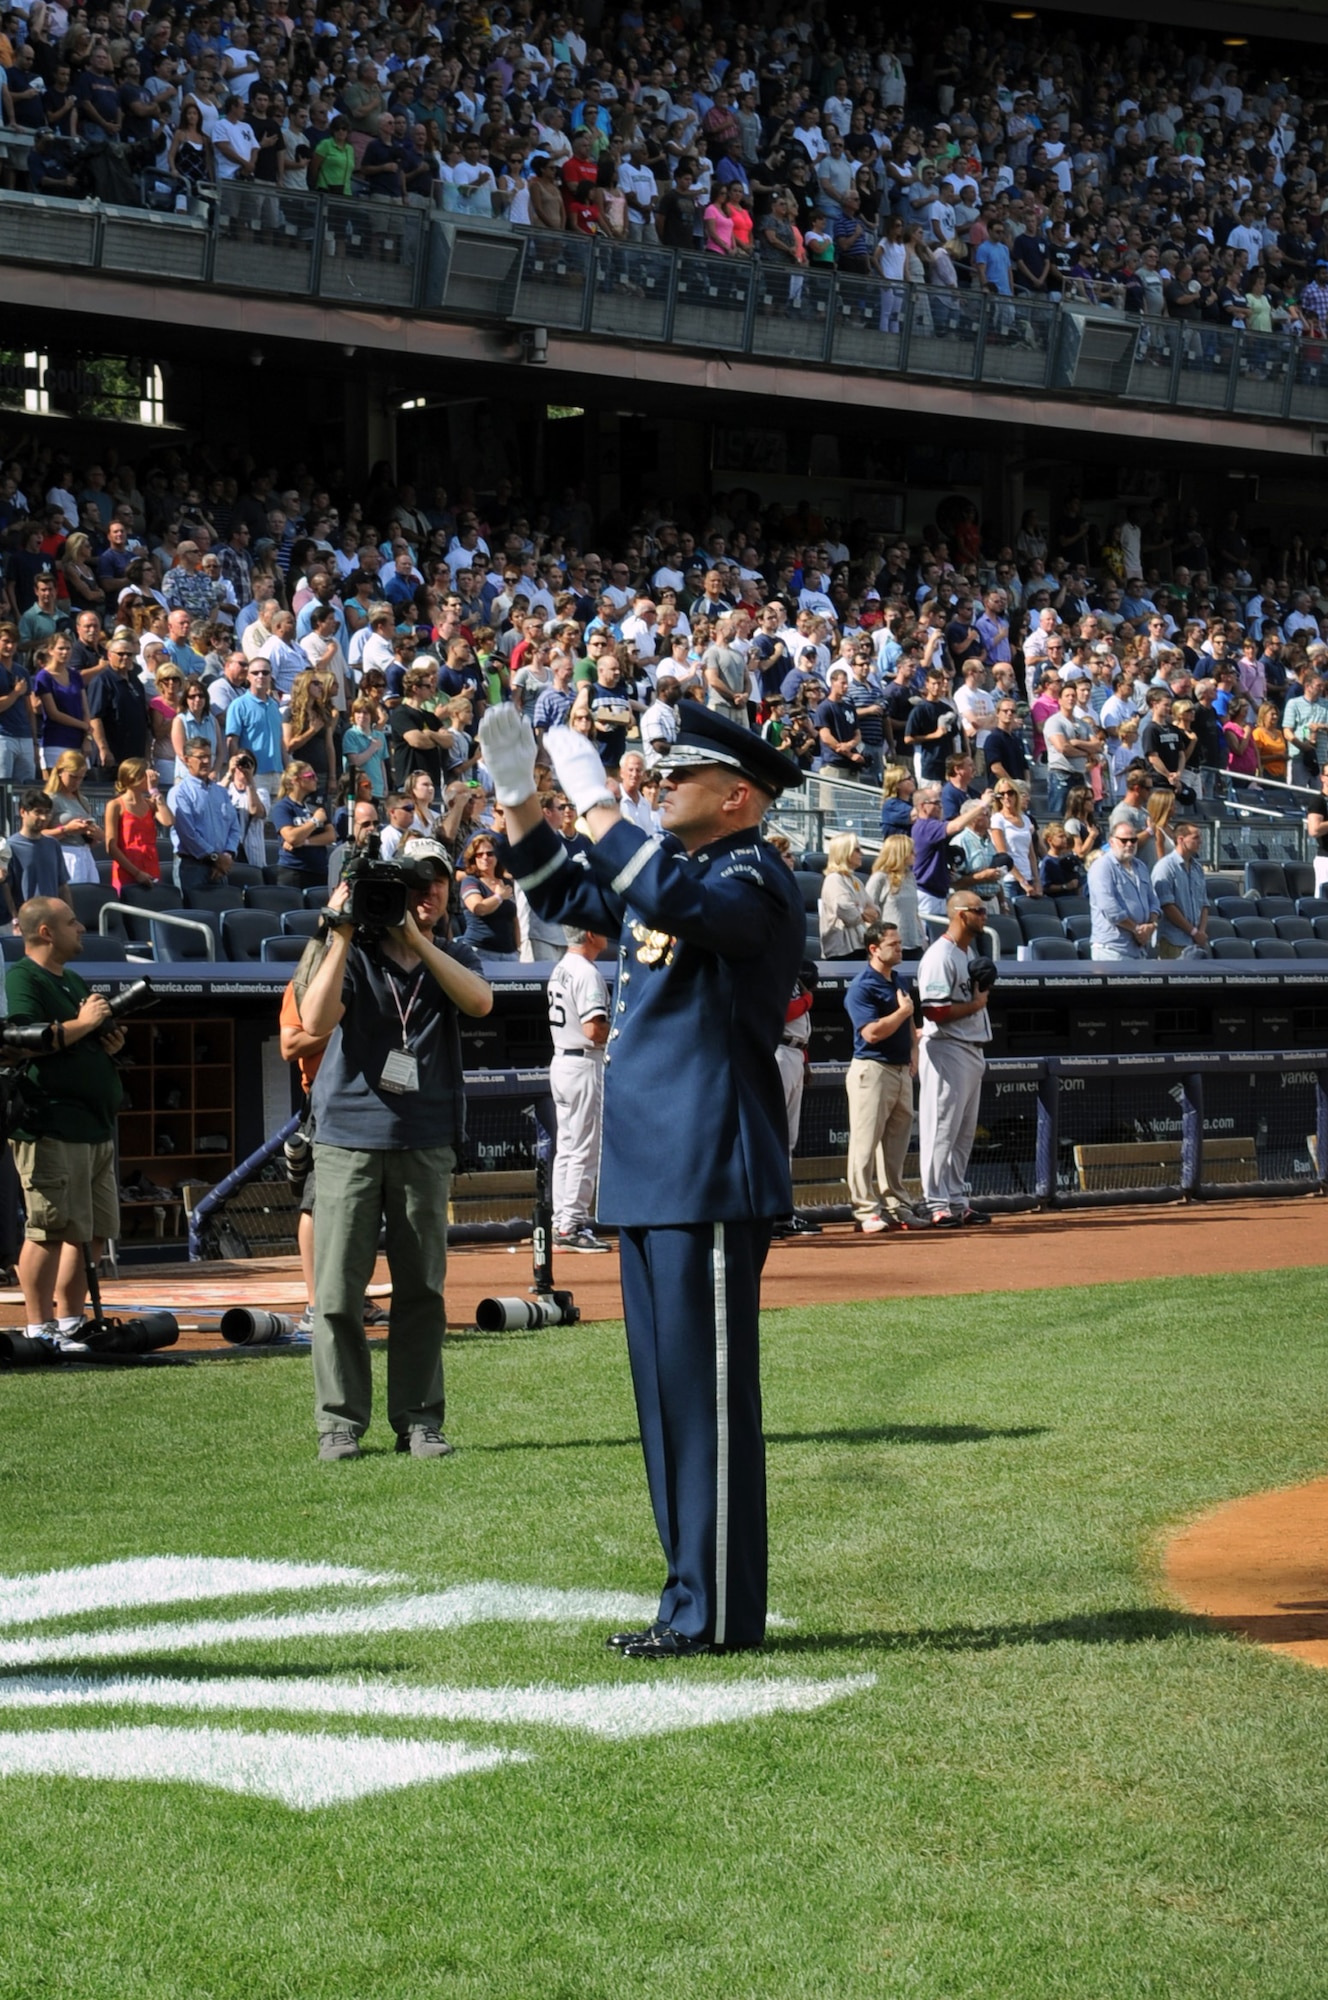 The U.S. Air Force Band Commander and Conductor Col. Larry Lang conducts The Ceremonial Brass during the opening ceremony for the Yankees vs. Red Sox game Aug. 18 at the Yankee Stadium, Bronx, N.Y. The performance kicked off the ceremonial unit’s participation in Air Force Week 2012. (U.S. Air Force photo by Senior Airman Tabitha N. Haynes) 